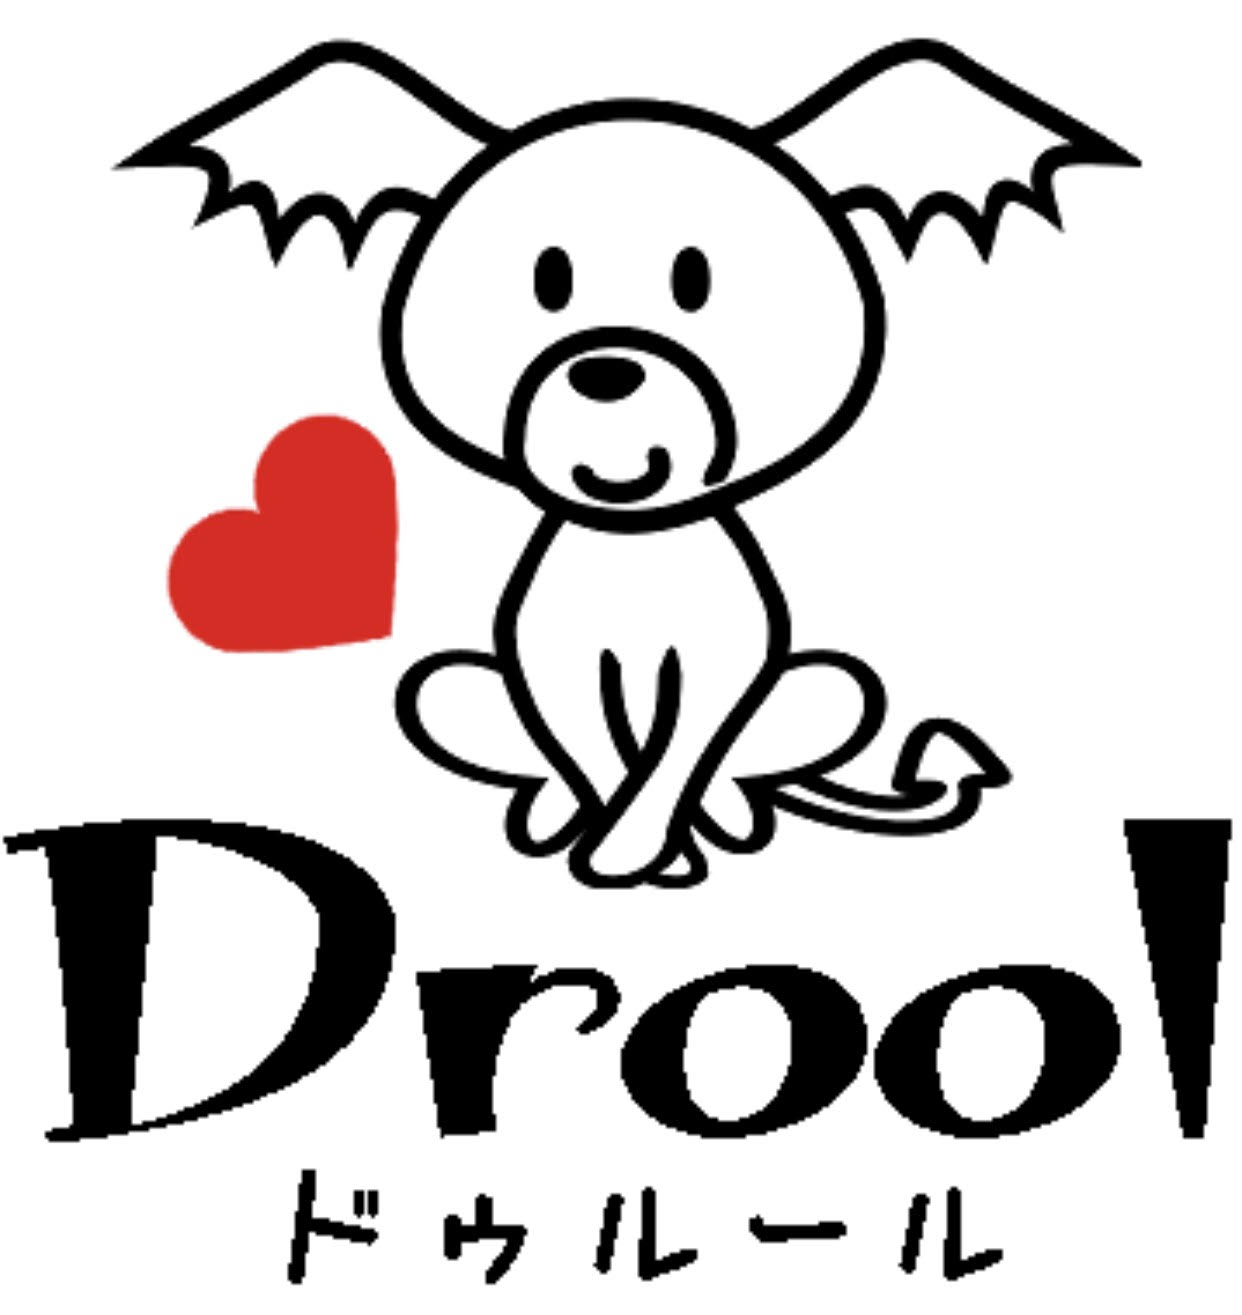 Drool　サイトハウンドフェス